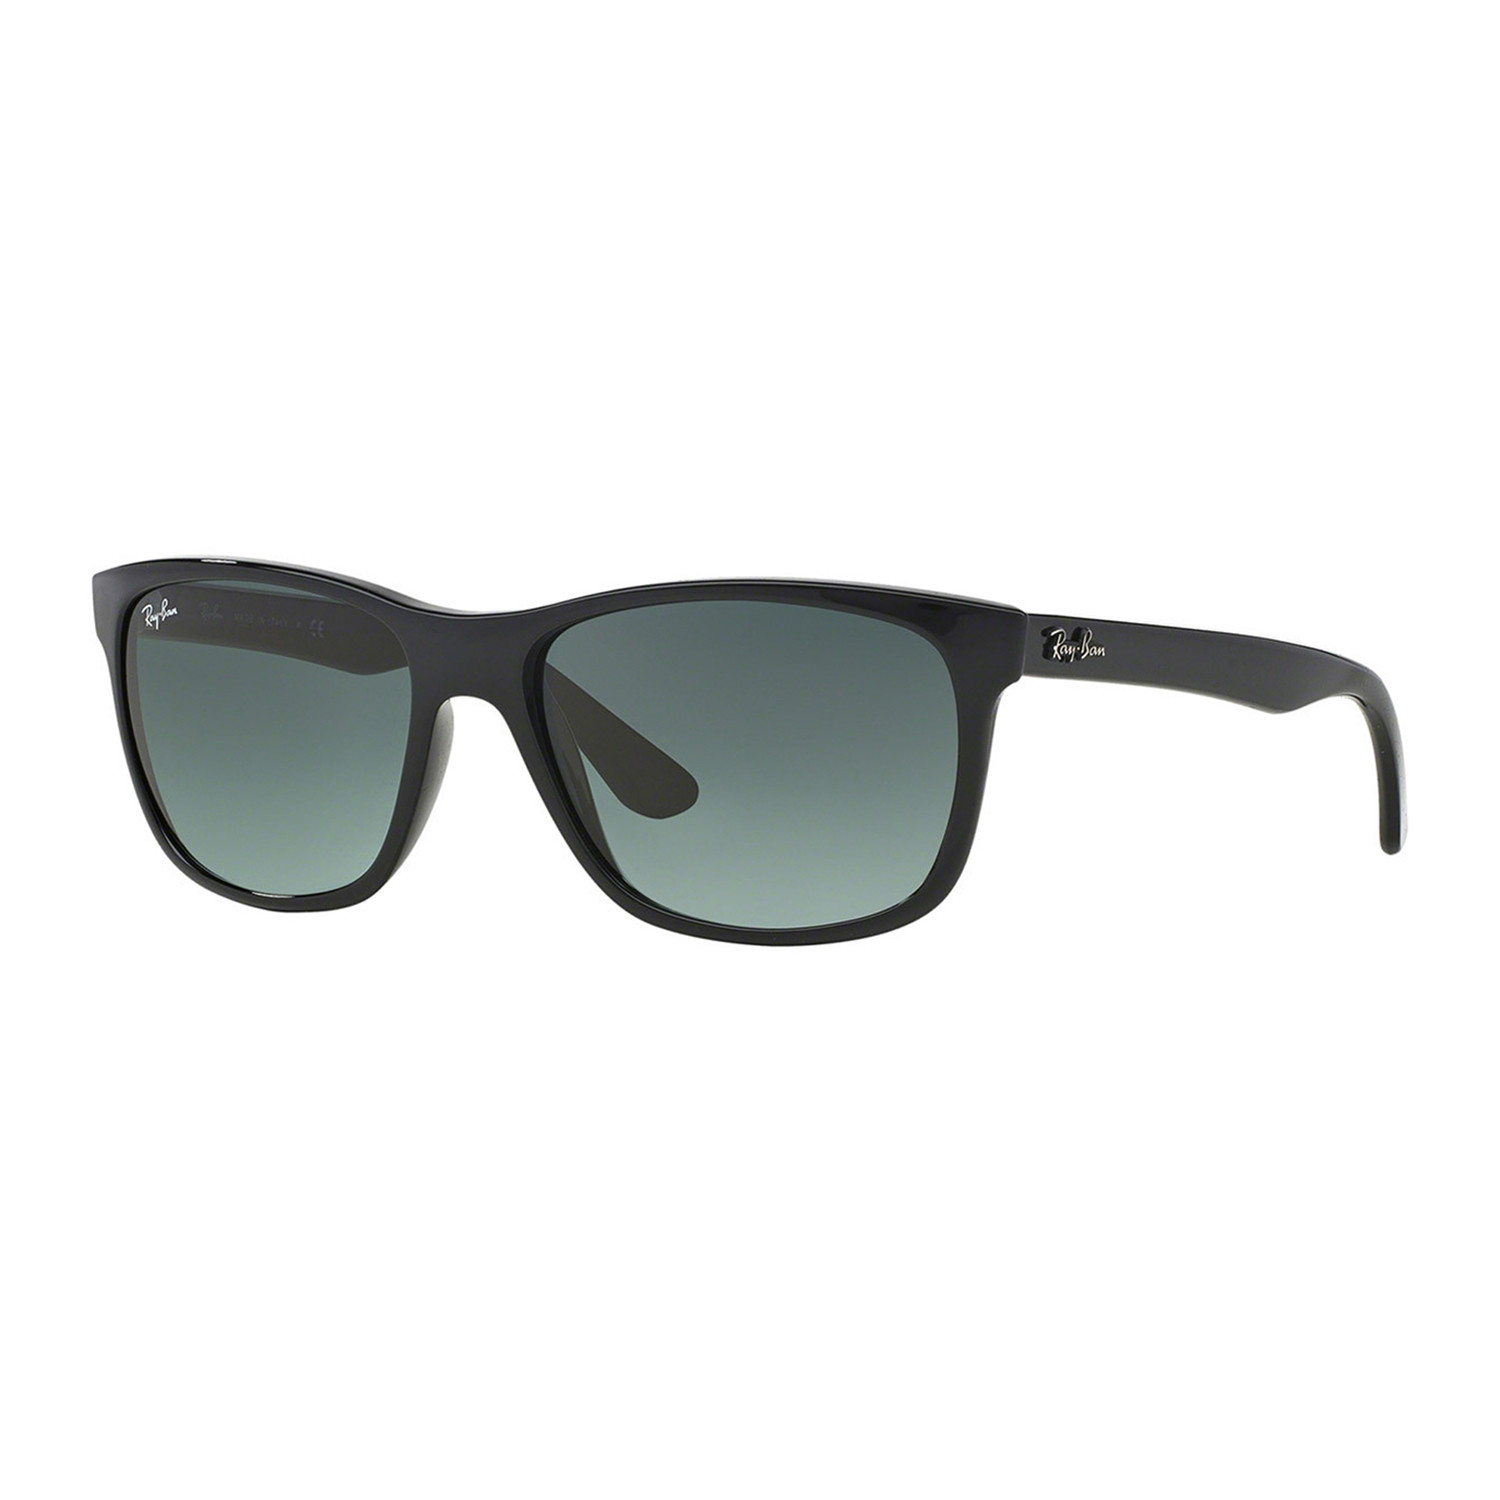 Unisex Injected Acetate Square Sunglasses Black Crystal Gray